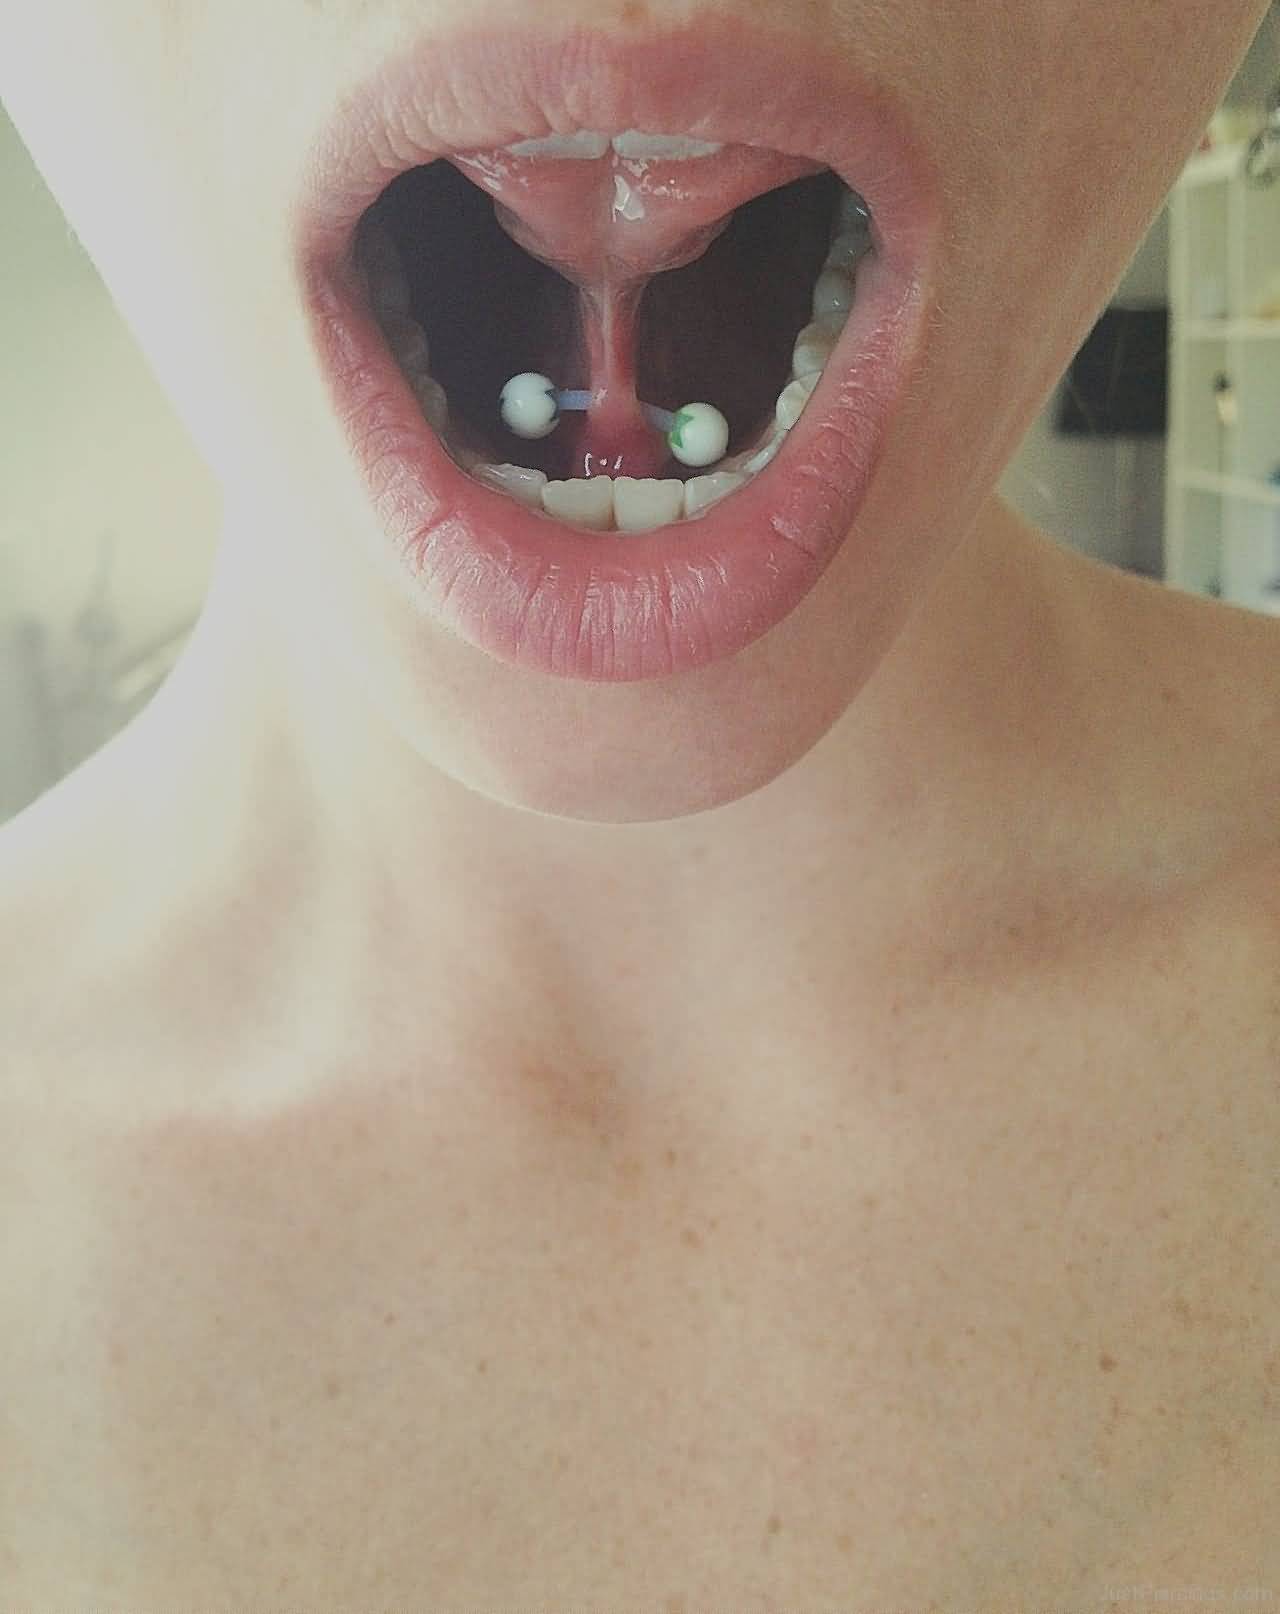 Amazing Tongue Frenulum Piercing With White Barbell